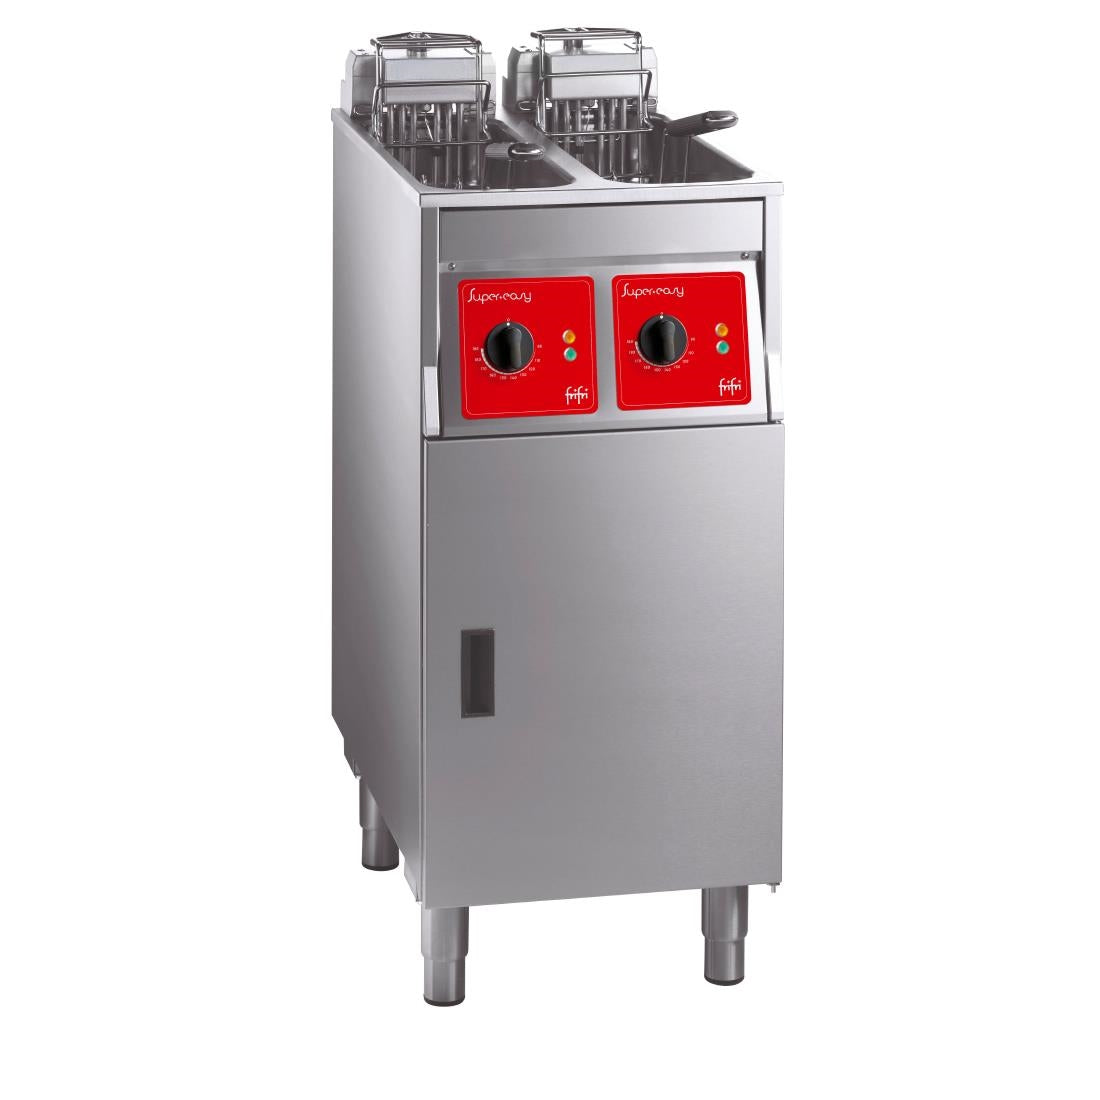 HS062-3PH FriFri Super Easy 422 Electric Free-Standing Twin Tank Fryer with Filtration 2 Baskets 2x 7.5kW - Three Phase